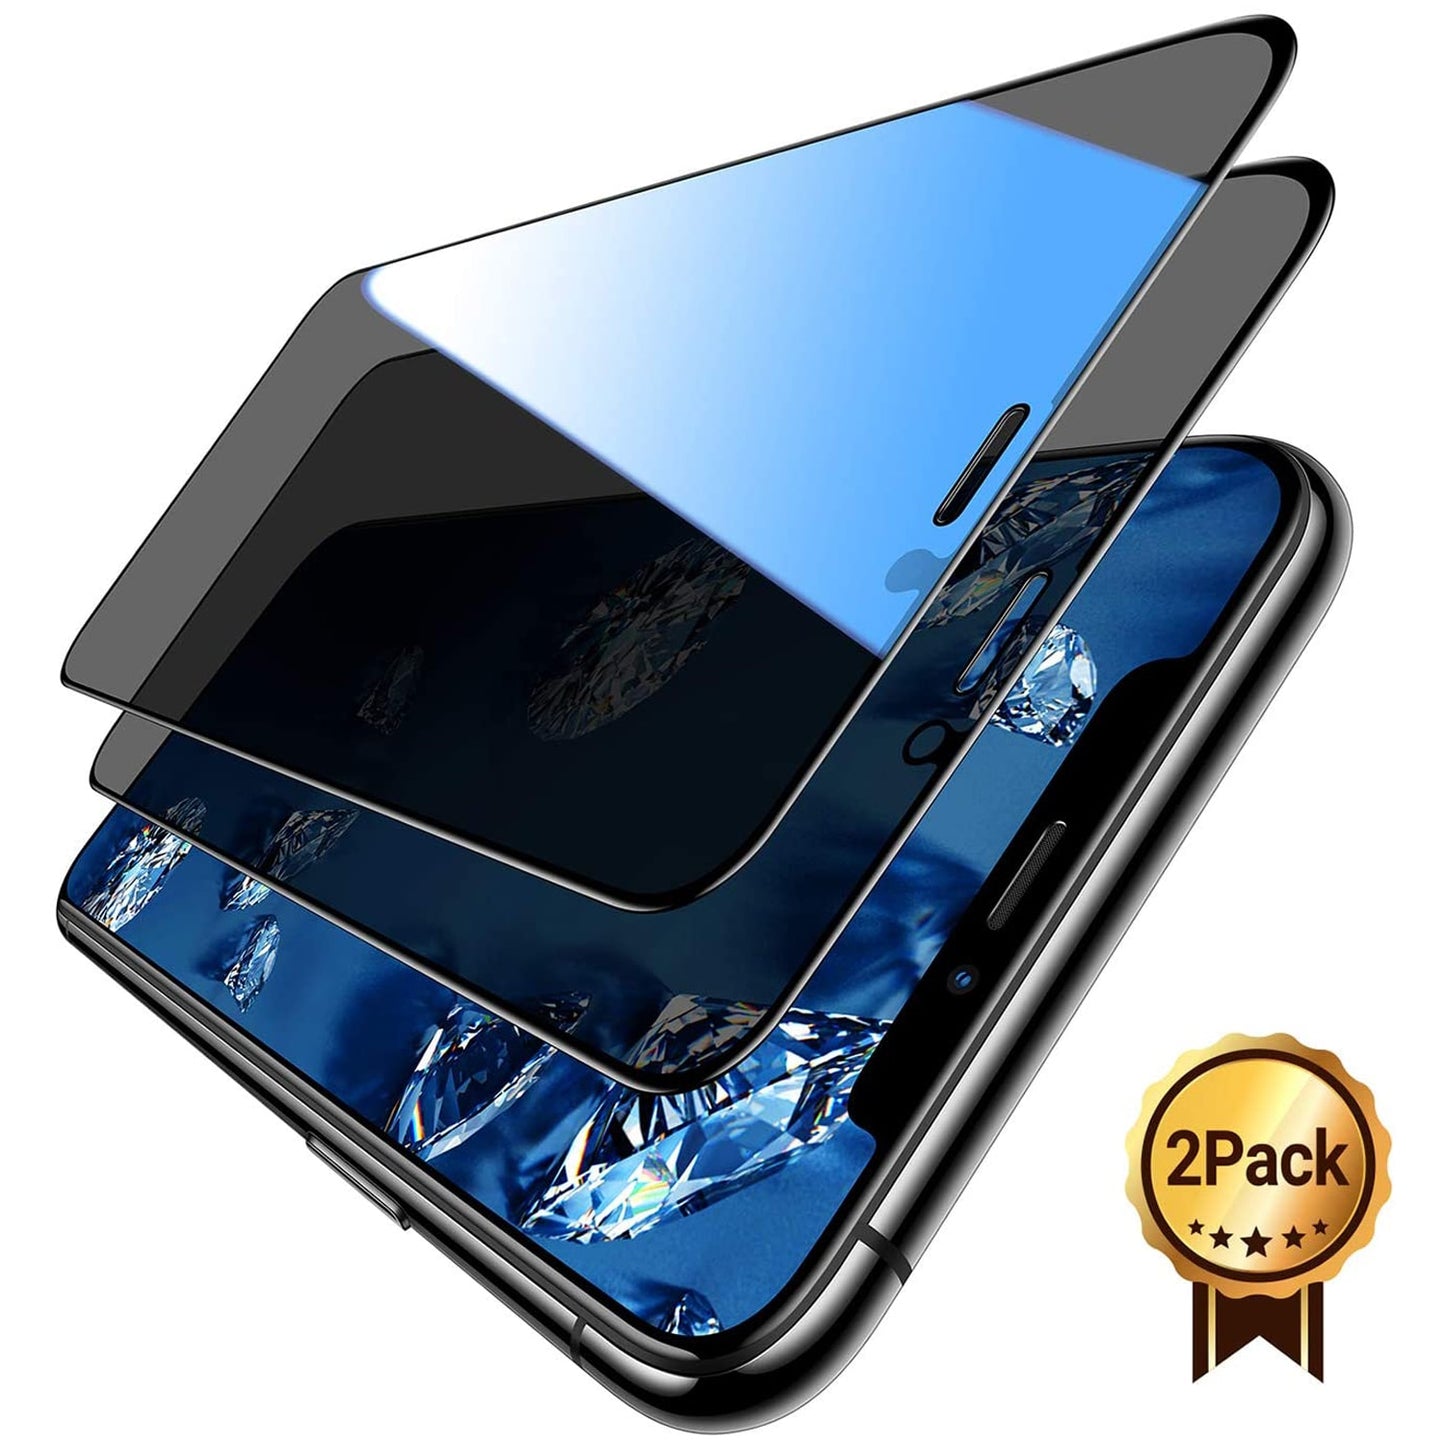 Anti-Spy Screen Protector for iPhones